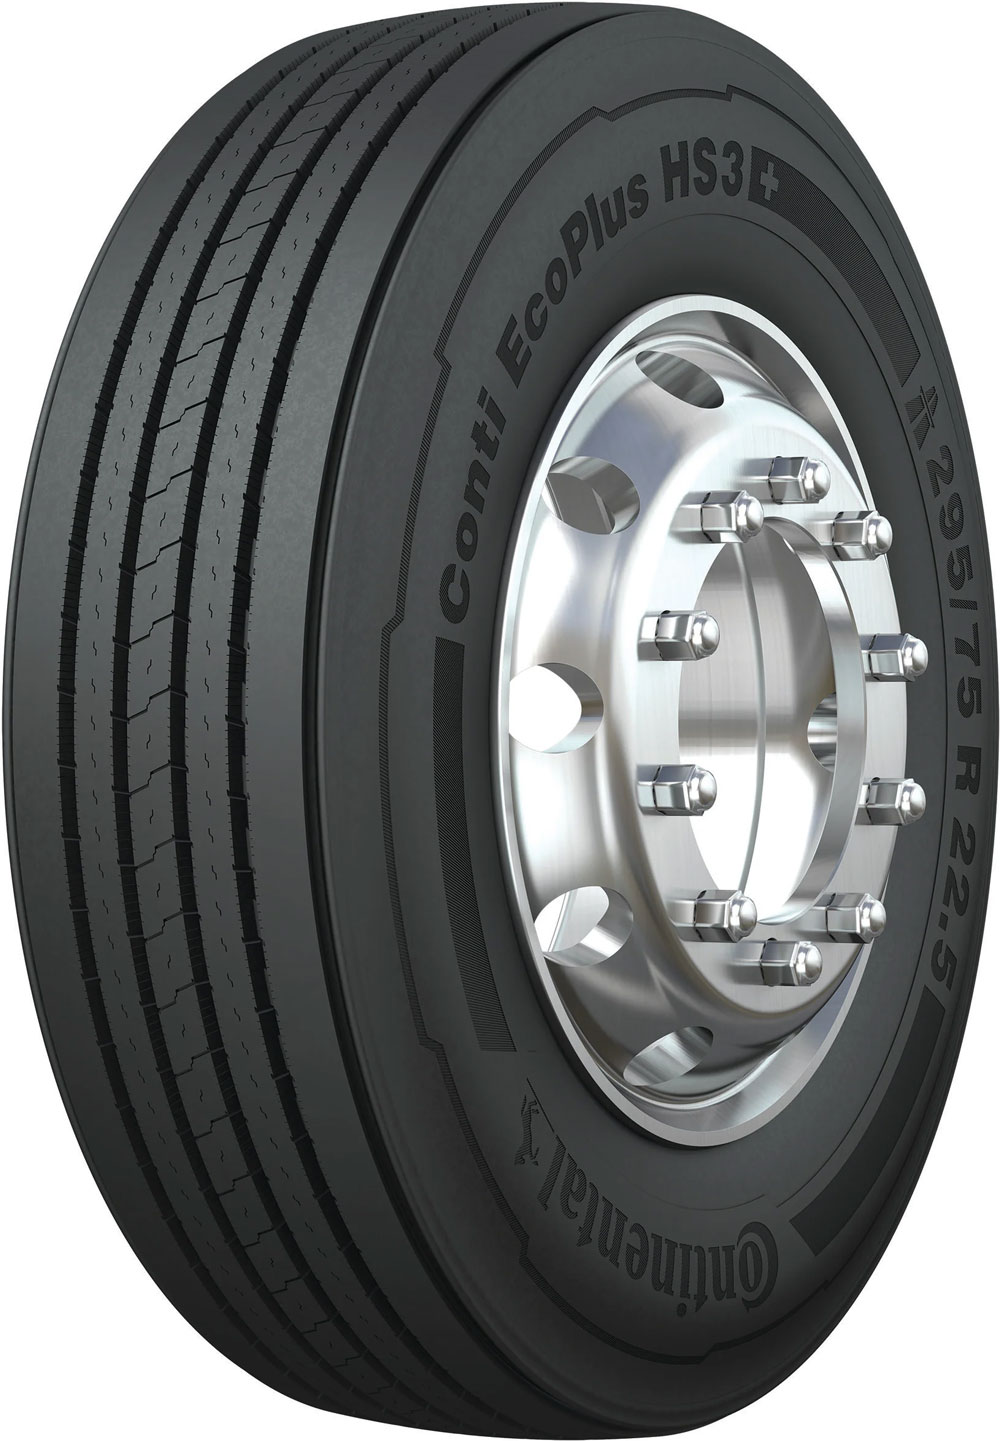 product_type-heavy_tires CONTINENTAL EcoPlus HS3+ 20 TL 315/80 R22.5 156L